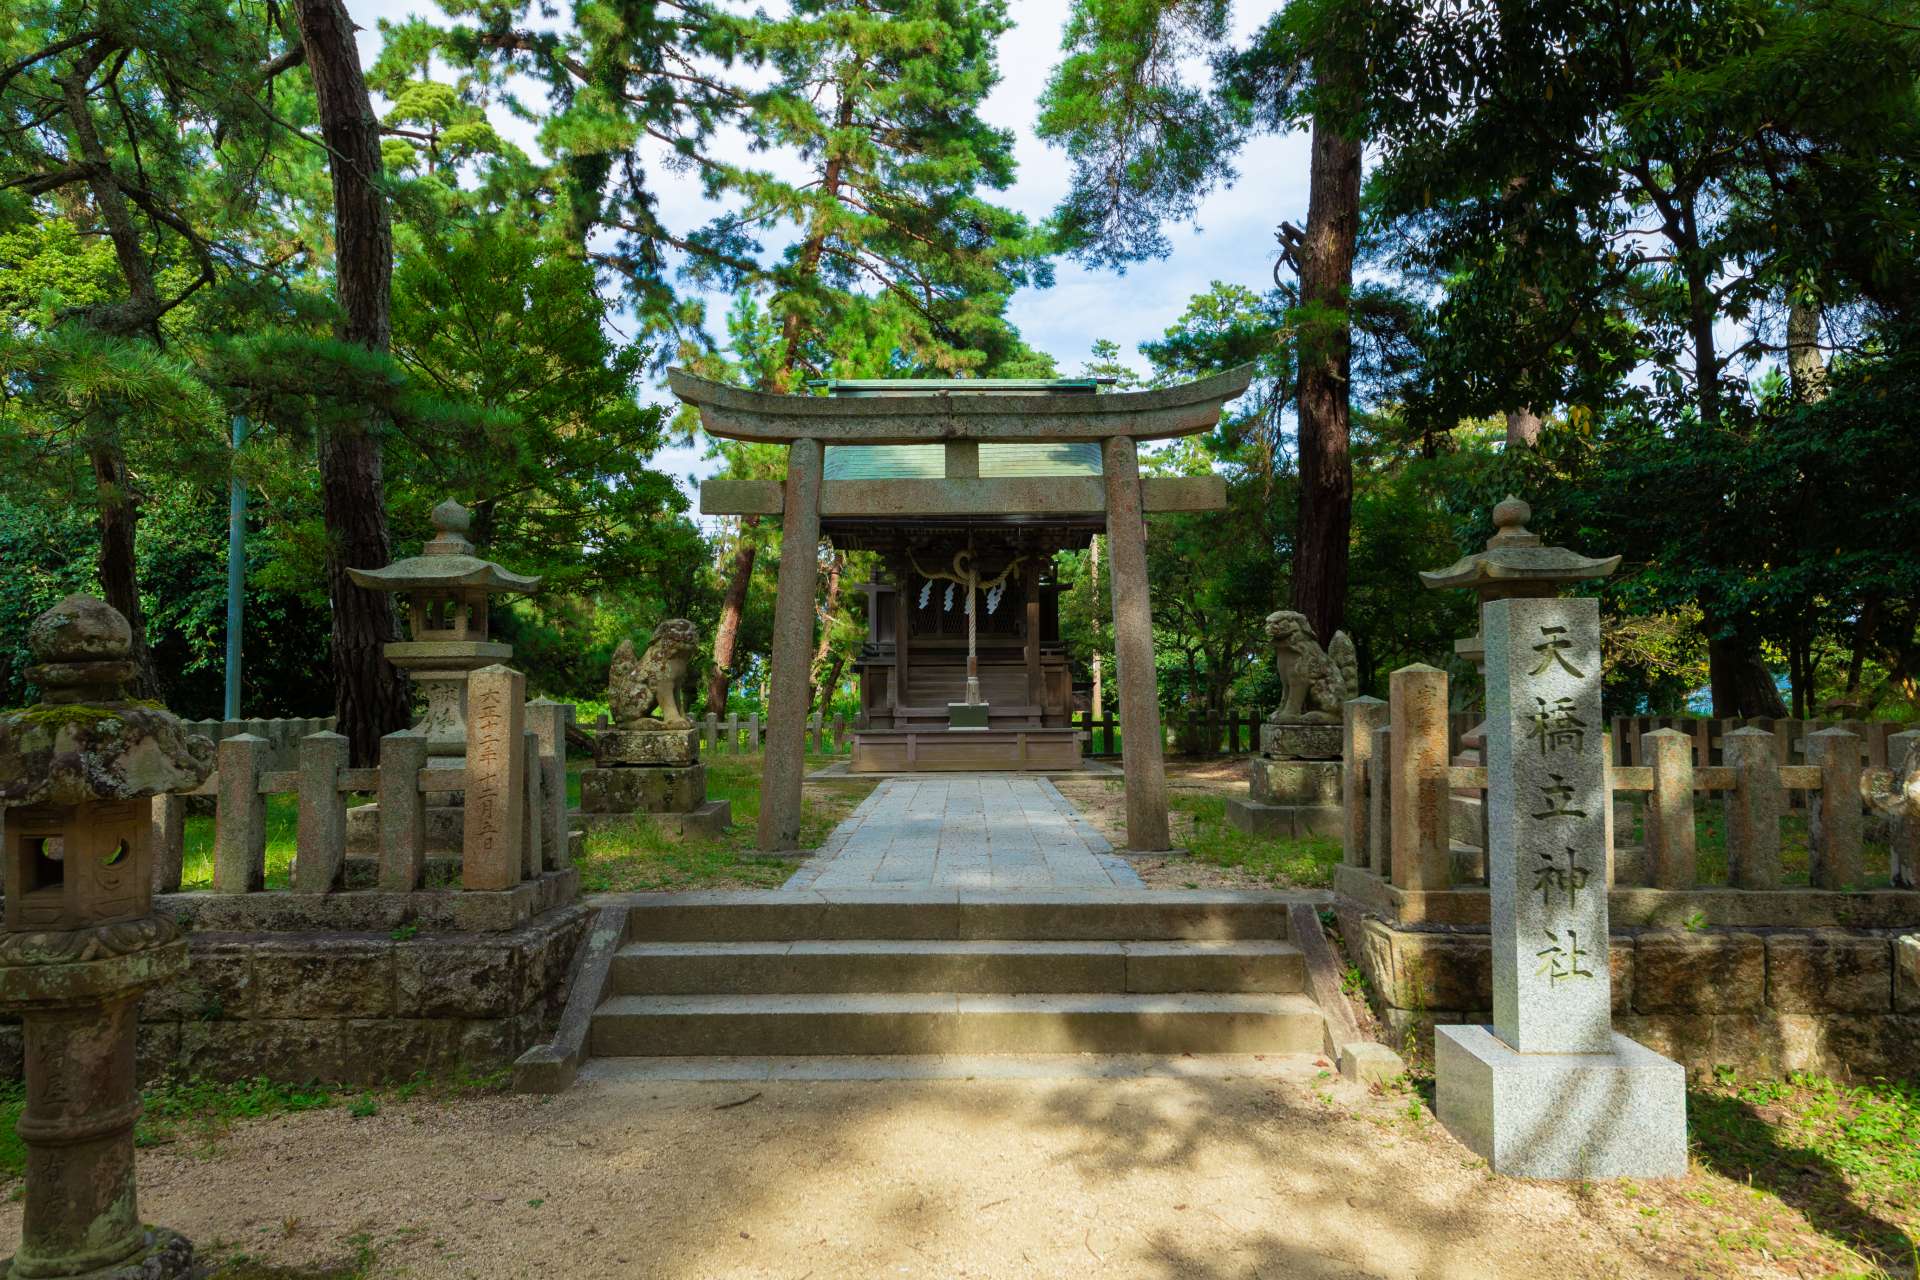 Around the midway, there is Amanohashidate Shrine, a popular place to make romantic wishes.